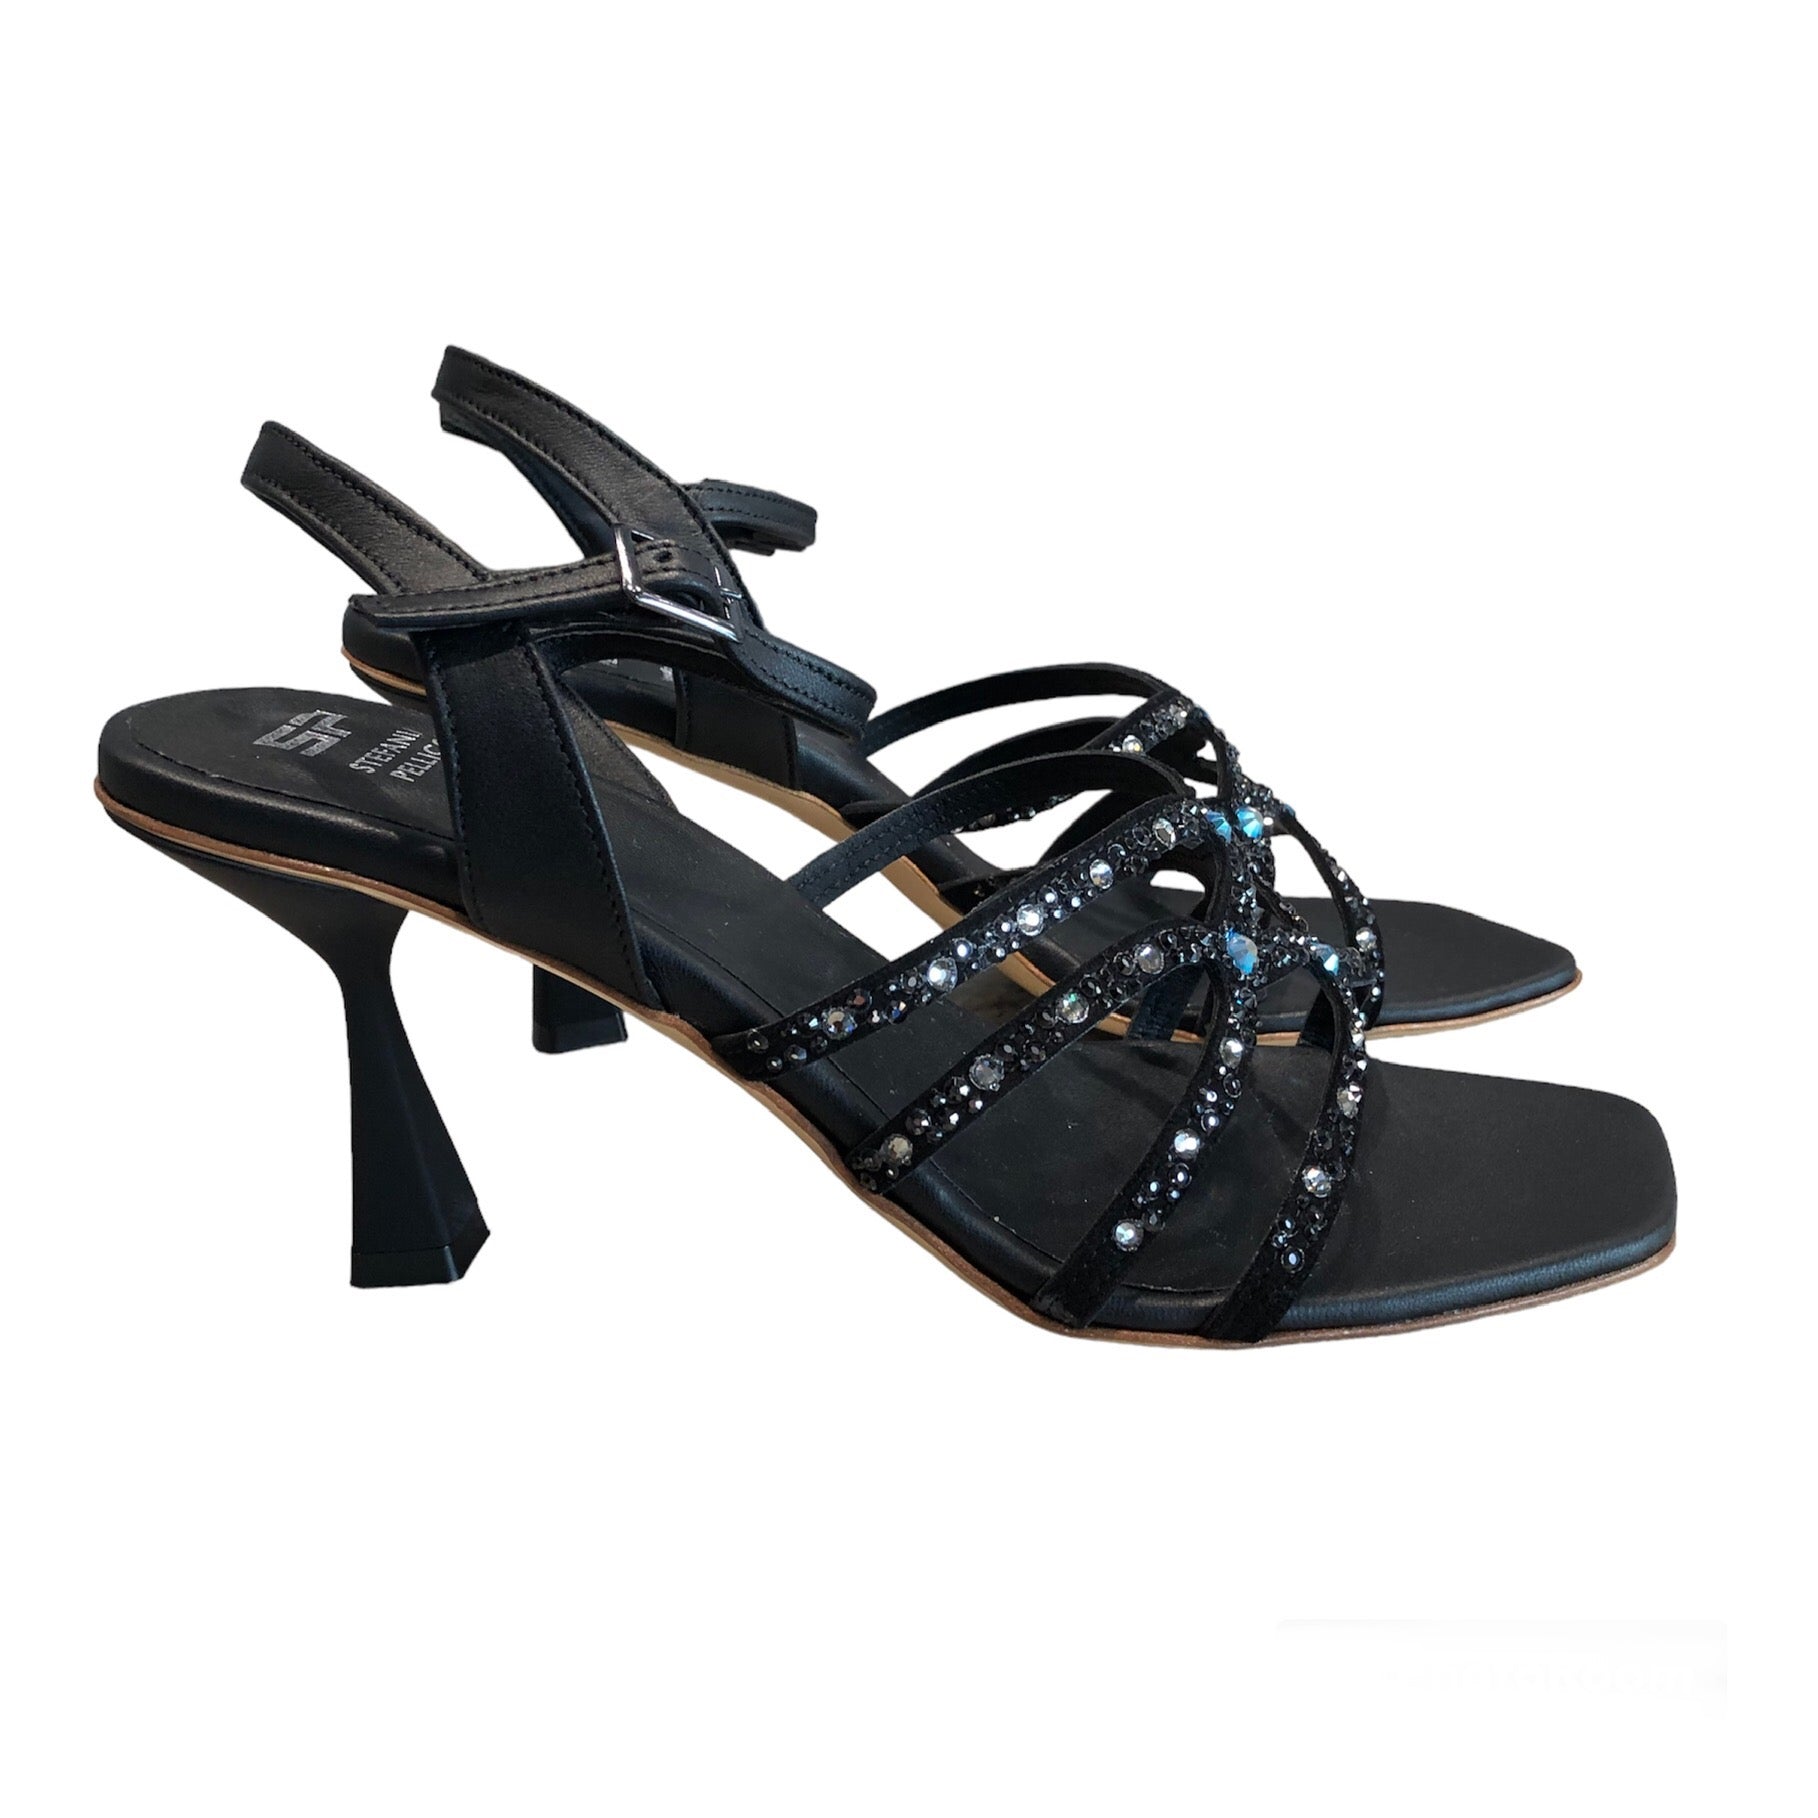 Black Sandals with Crystals